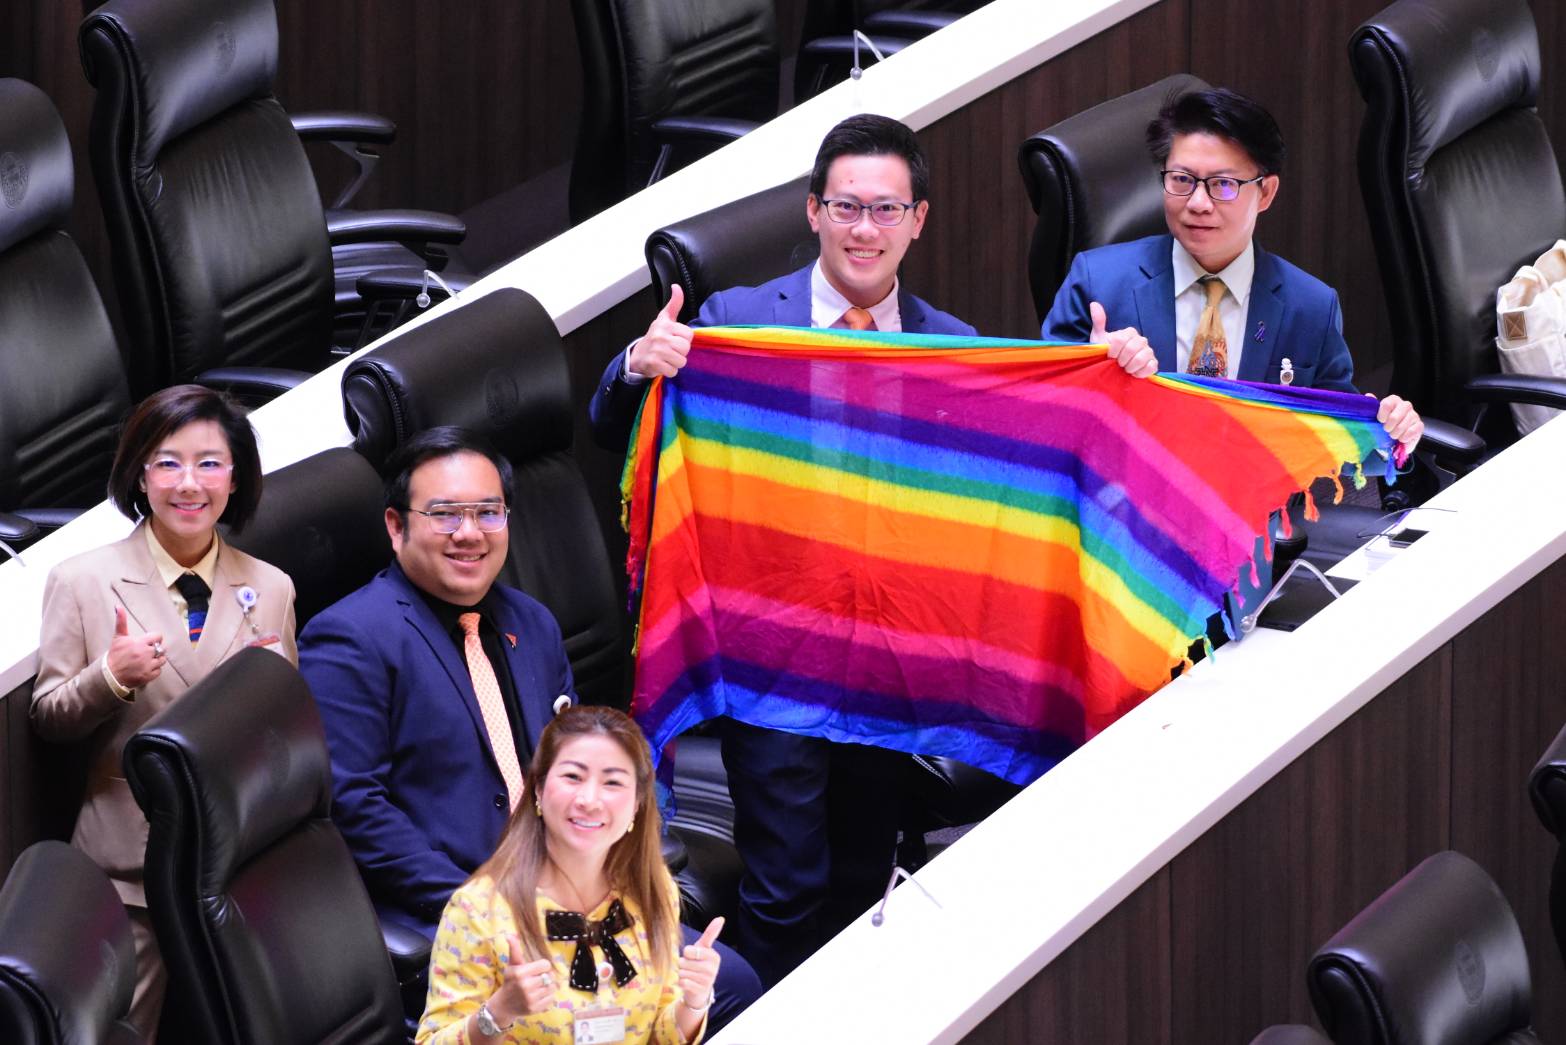 Thai parliament passes same-sex marriage bill, the first in Southeast Asia